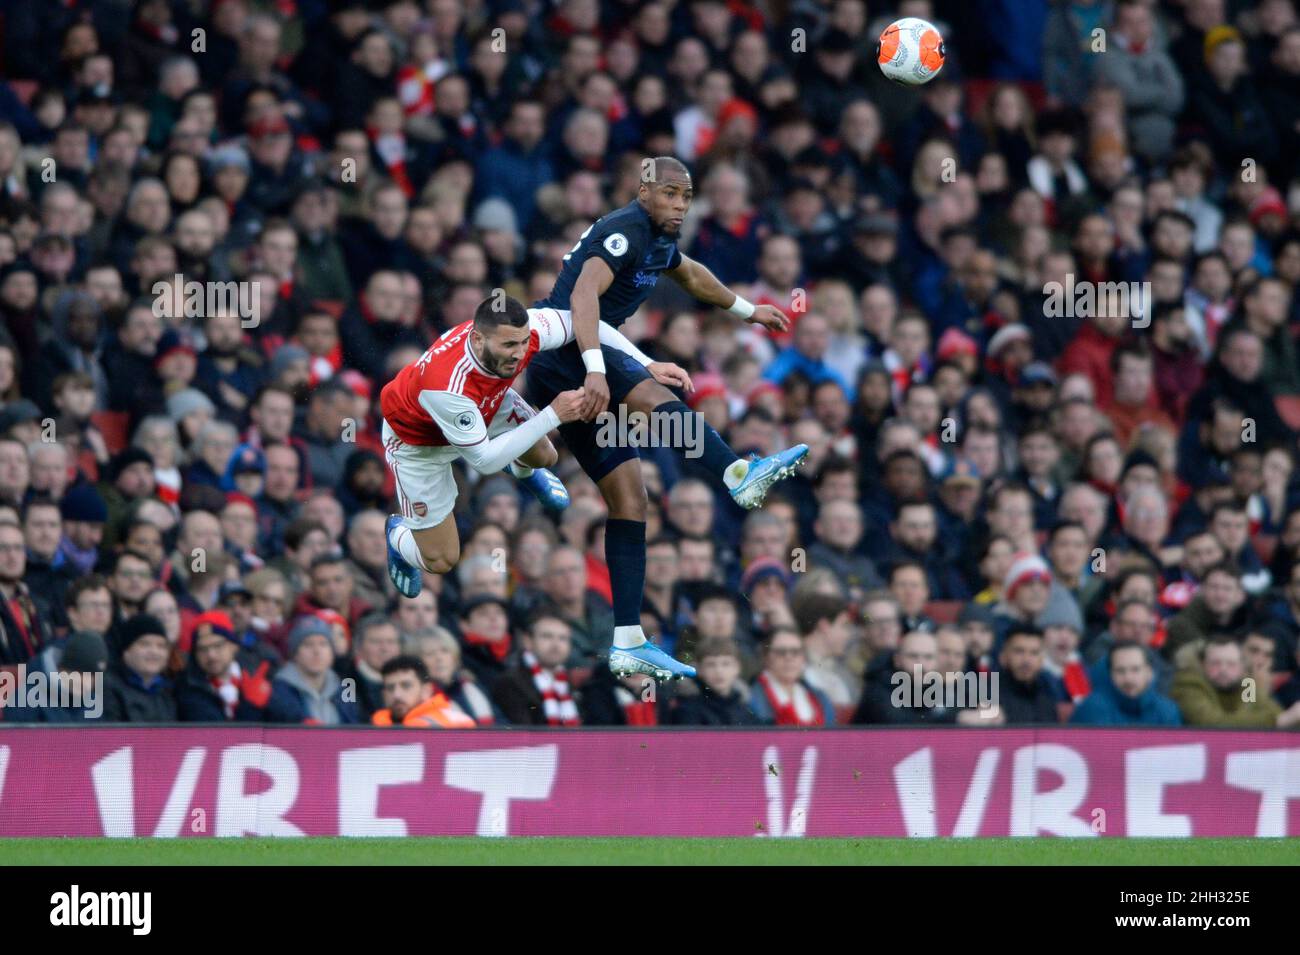 Sead Kolasinac of Arsenal is fouled by Djibril Sidibe of Everton during the Premier League match between Arsenal and Everton at the Emirates Stadium in London, UK - 16th February 2020 Stock Photo